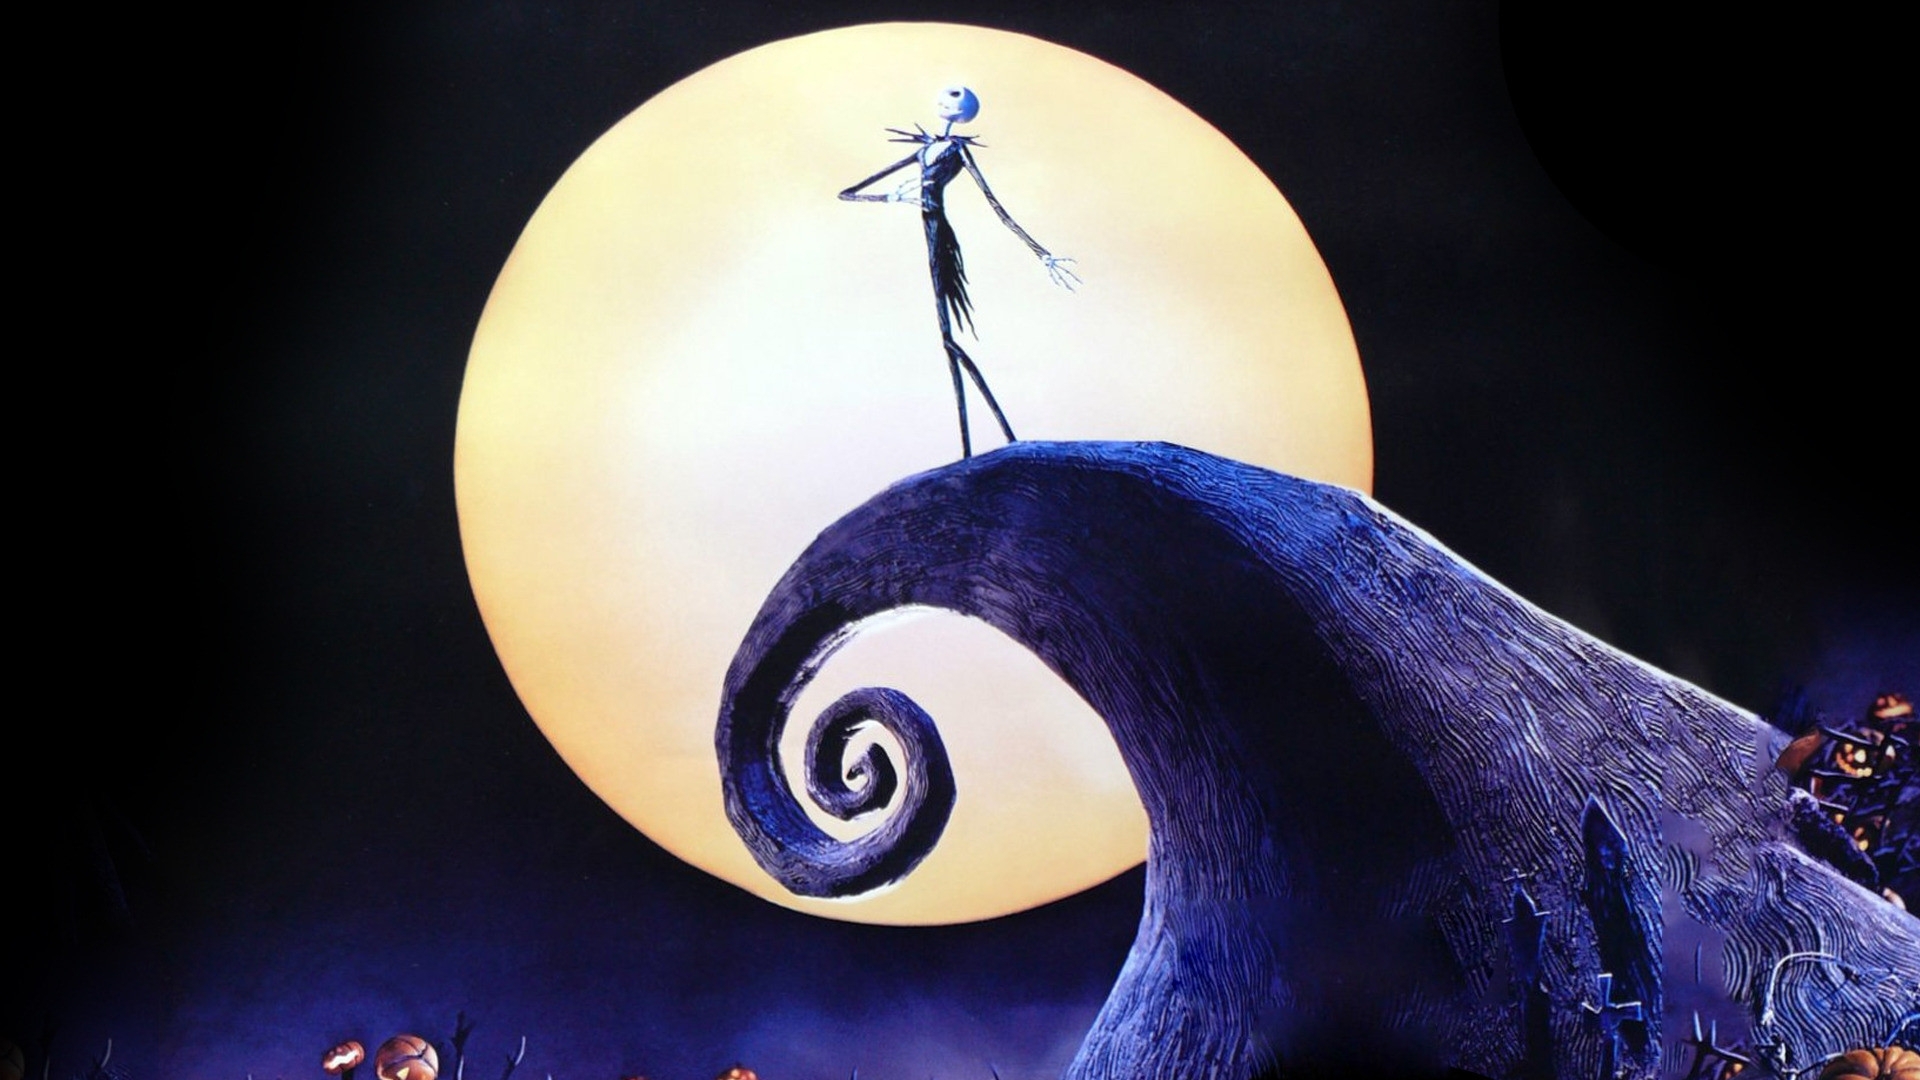 10 New Nightmare Before Christmas 1080P Wallpaper FULL HD 1080p For PC Background